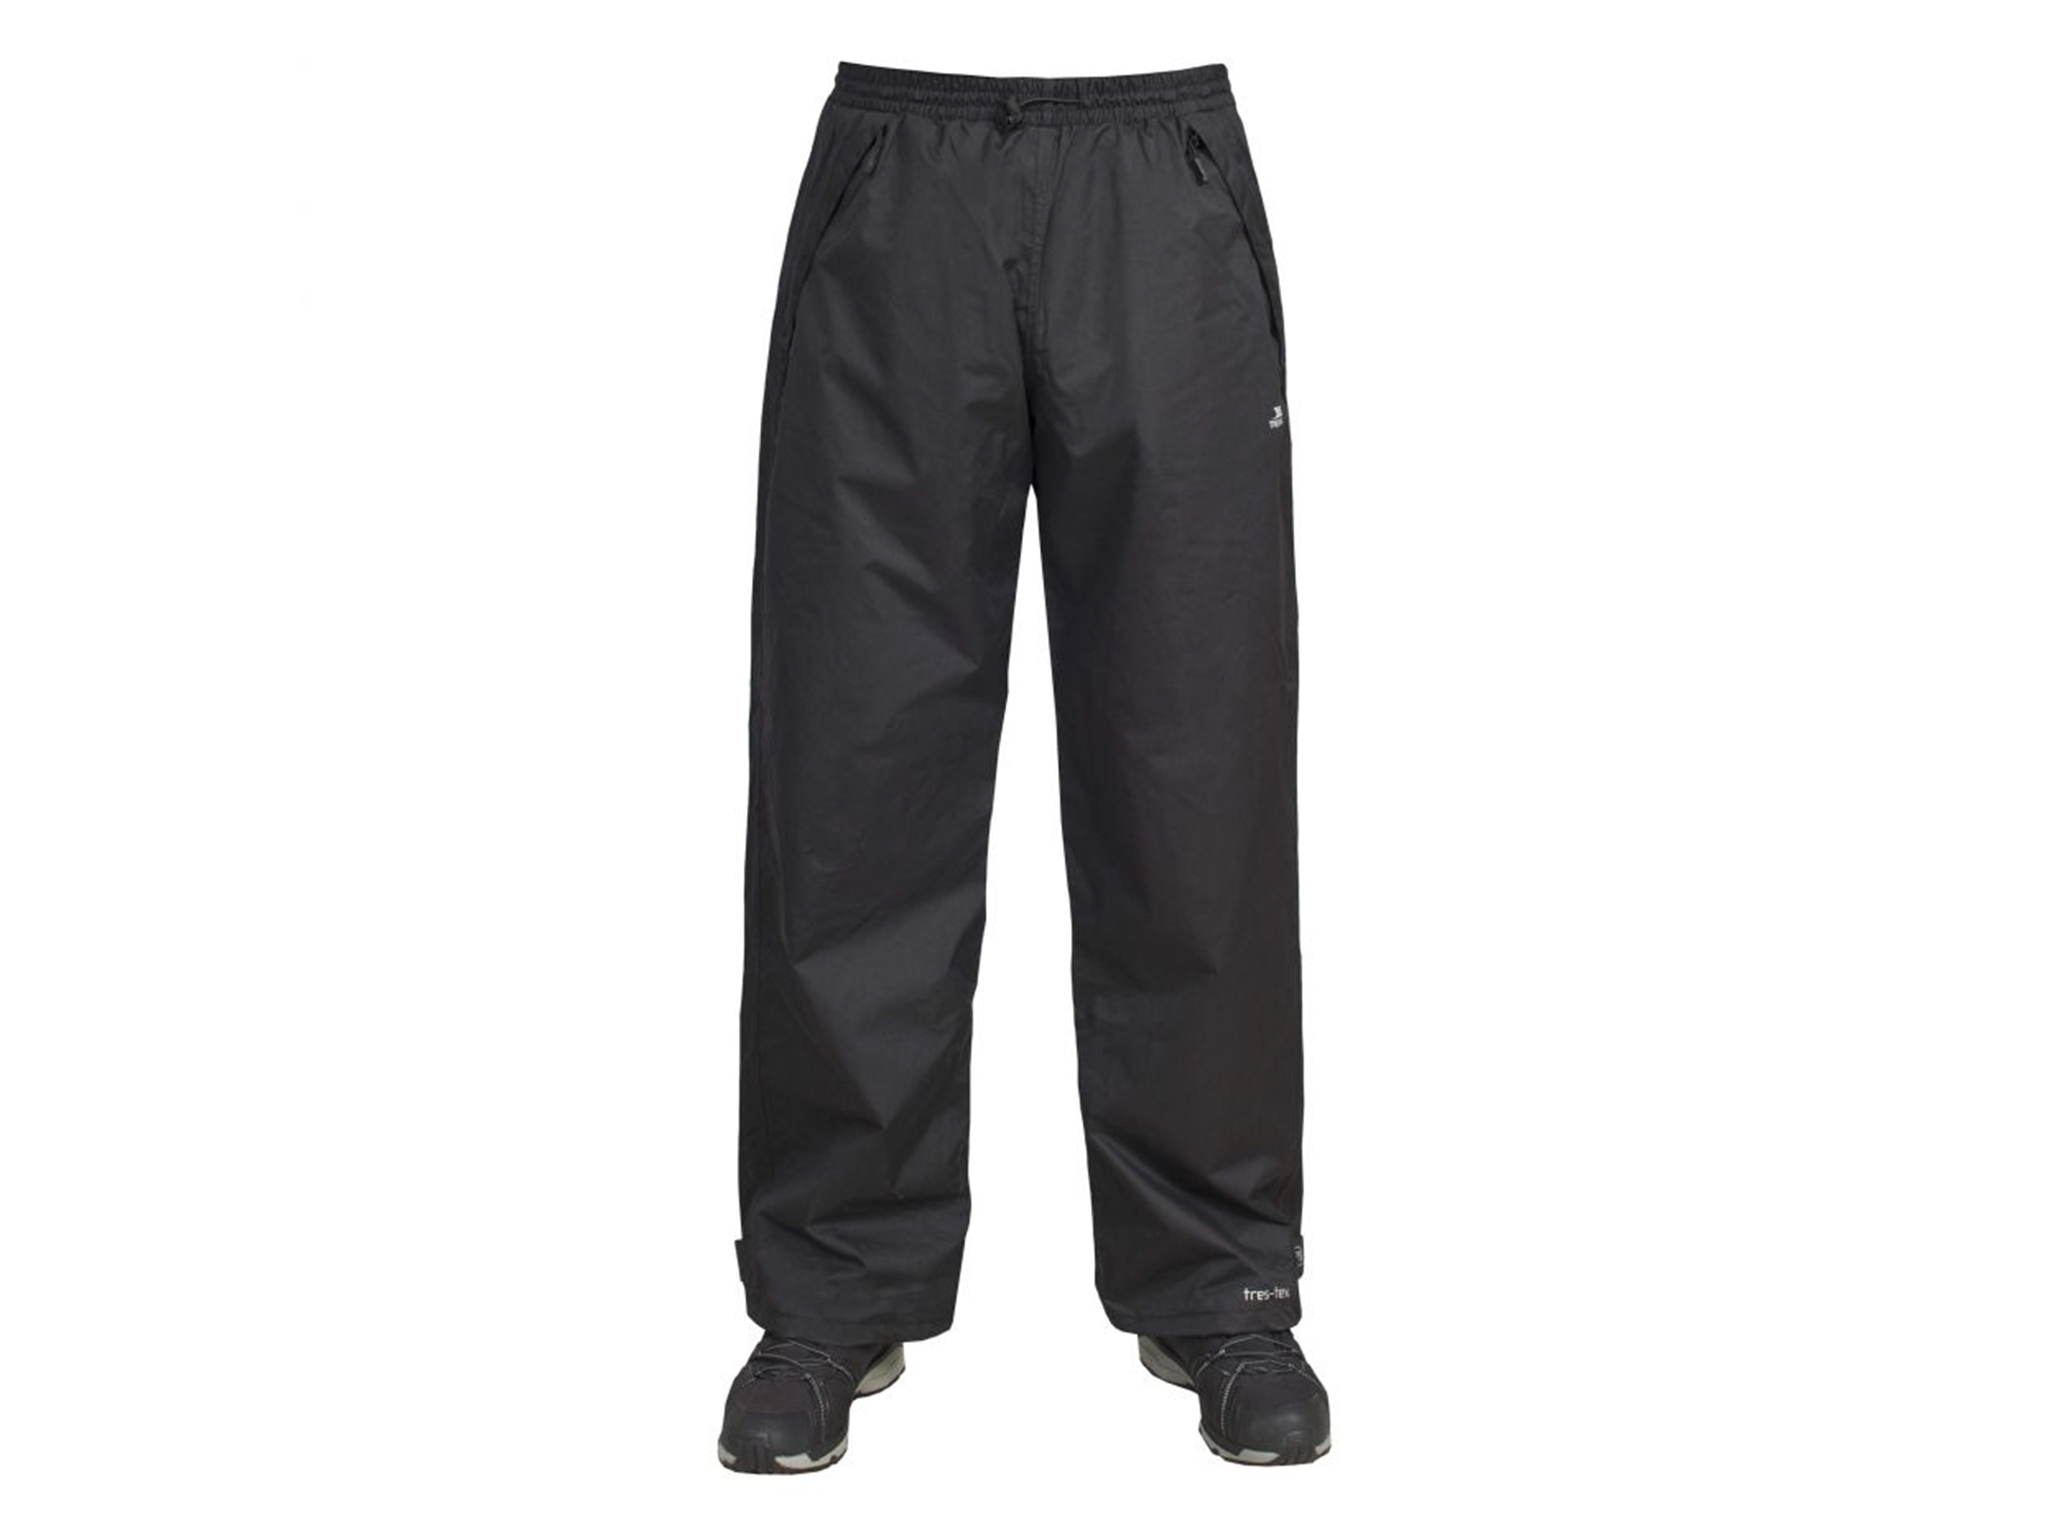 33,000ft Men's Waterproof Trousers Lightweight Breathable Rain Overtrousers  with Pockets, Outdoor Windproof Rain Pants for Golf Walking Hiking Fishing  Black XS/34 Inseam : Amazon.co.uk: Fashion